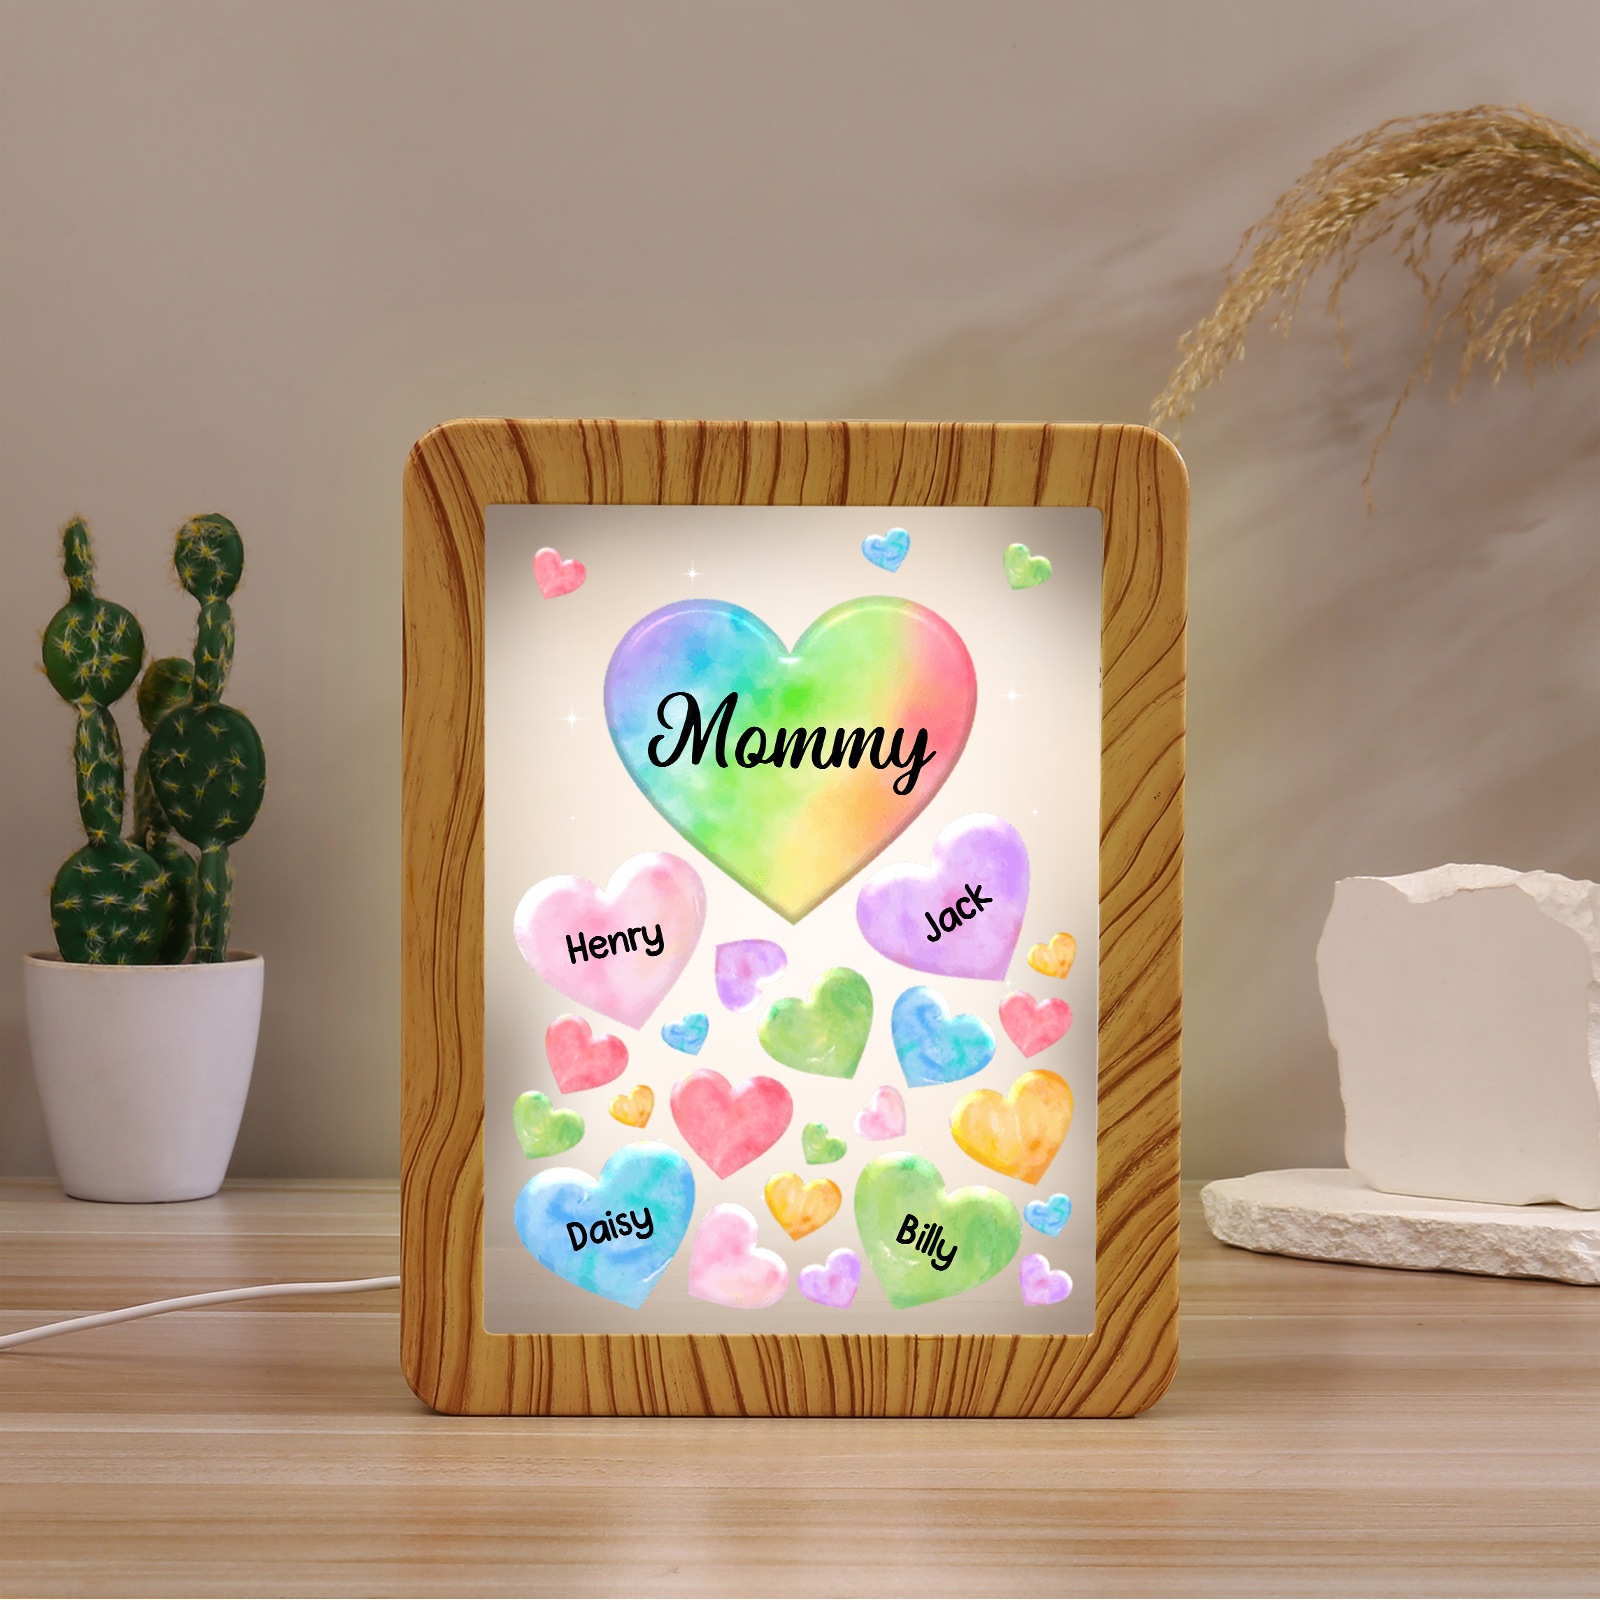 4 Name - Personalized Mum Home Wood Color Plug-in Mirror Photo Frame Custom Text LED Night Light Gift for Mum